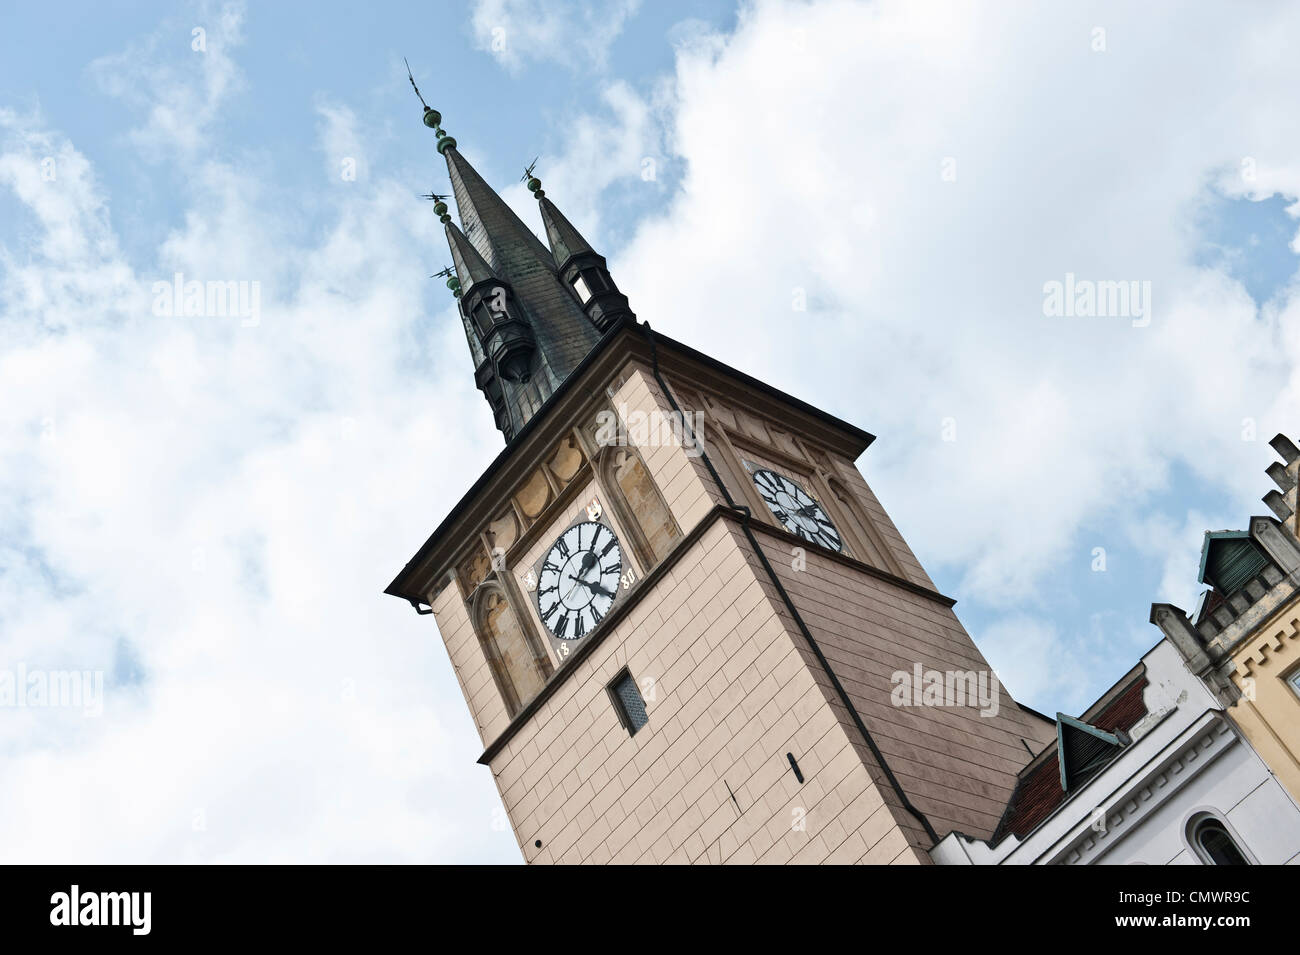 A clock on the tower of a stone building in Prague, Czech Republic. Stock Photo